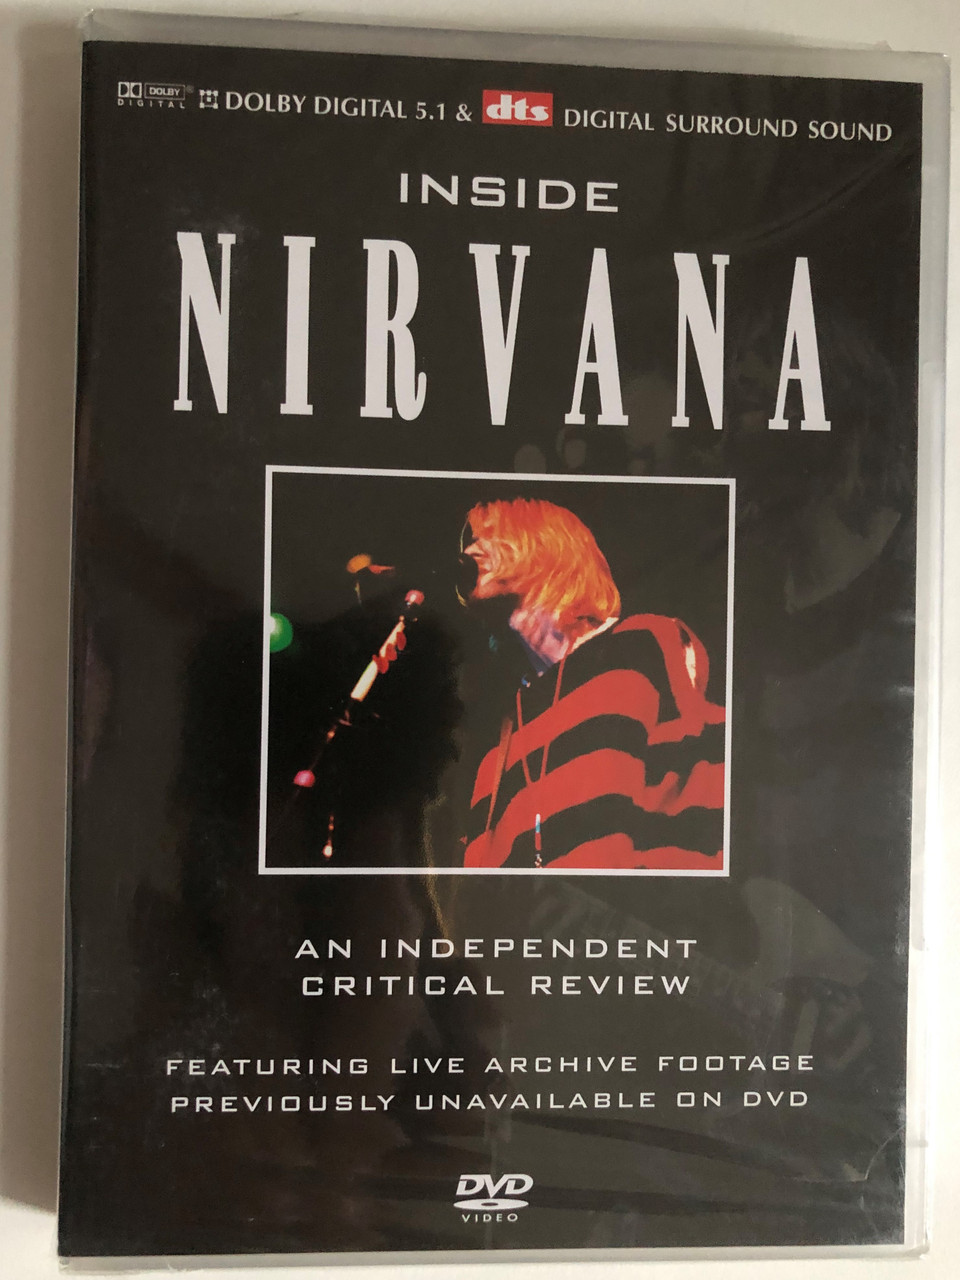 https://cdn10.bigcommerce.com/s-62bdpkt7pb/products/0/images/271593/Inside_Nirvana_An_Independent_Critical_Review_-_Featuring_Live_Archive_Footage_Previously_Unavailable_On_DVD_Classic_Rock_Productions_DVD_Video_CD_2004_CRP_1777_PAL_1__09685.1680273770.1280.1280.JPG?c=2&_gl=1*w9j13f*_ga*MjA2NTIxMjE2MC4xNTkwNTEyNTMy*_ga_WS2VZYPC6G*MTY4MDI3MDcyNS44MjguMS4xNjgwMjczNTc5LjMyLjAuMA..